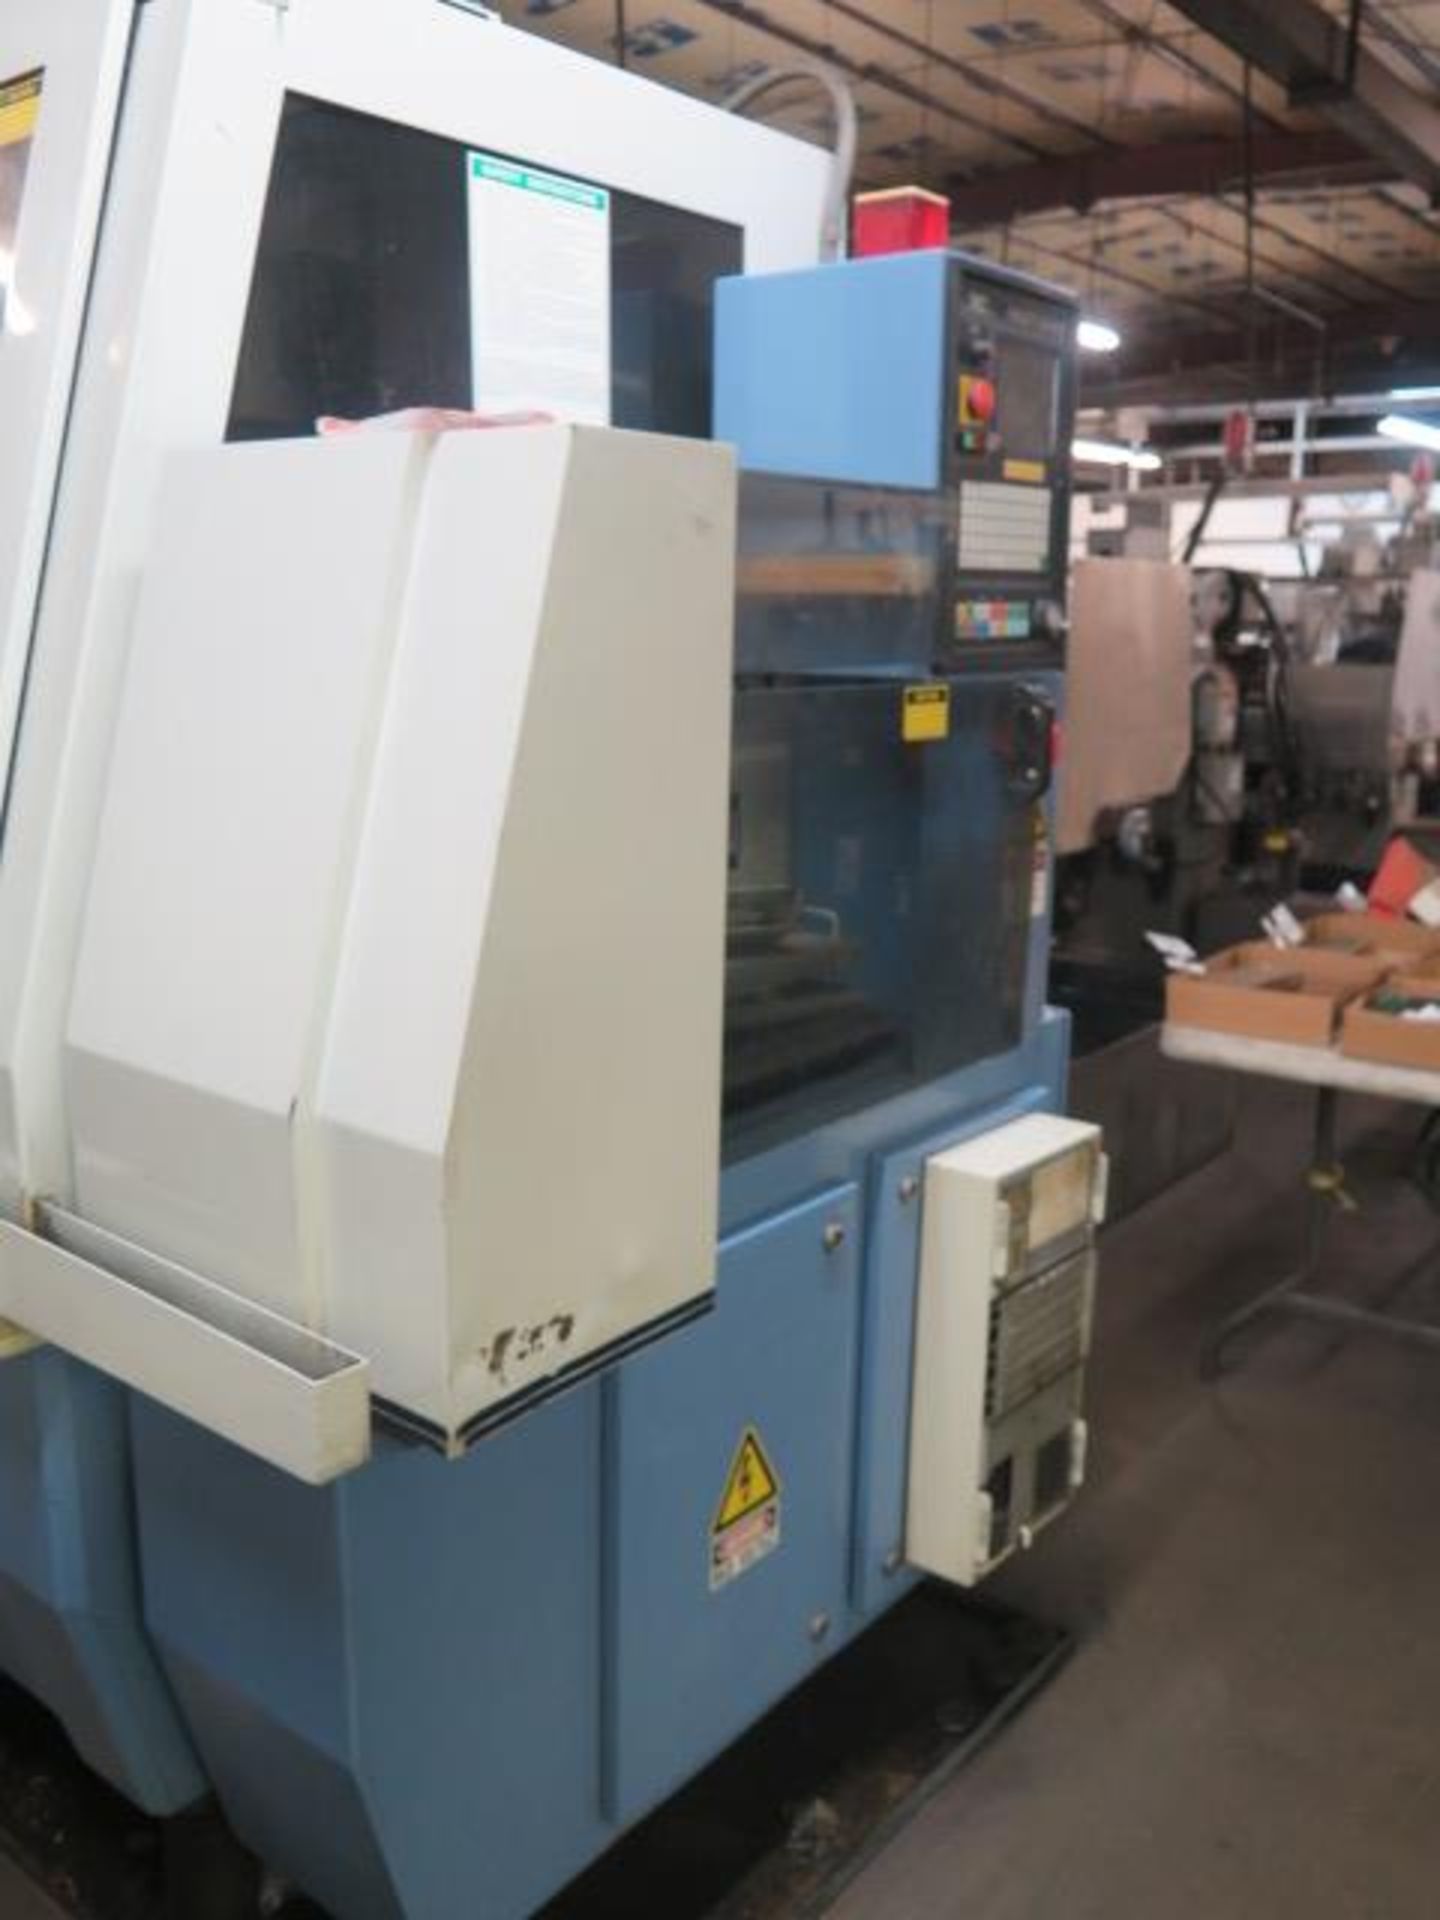 1997 Anca MG7 “Fastgrind” 7-Axis CNC Tool & Cutter Grinder w/ Anca Controls, Steady Rest, SOLD AS IS - Image 4 of 21